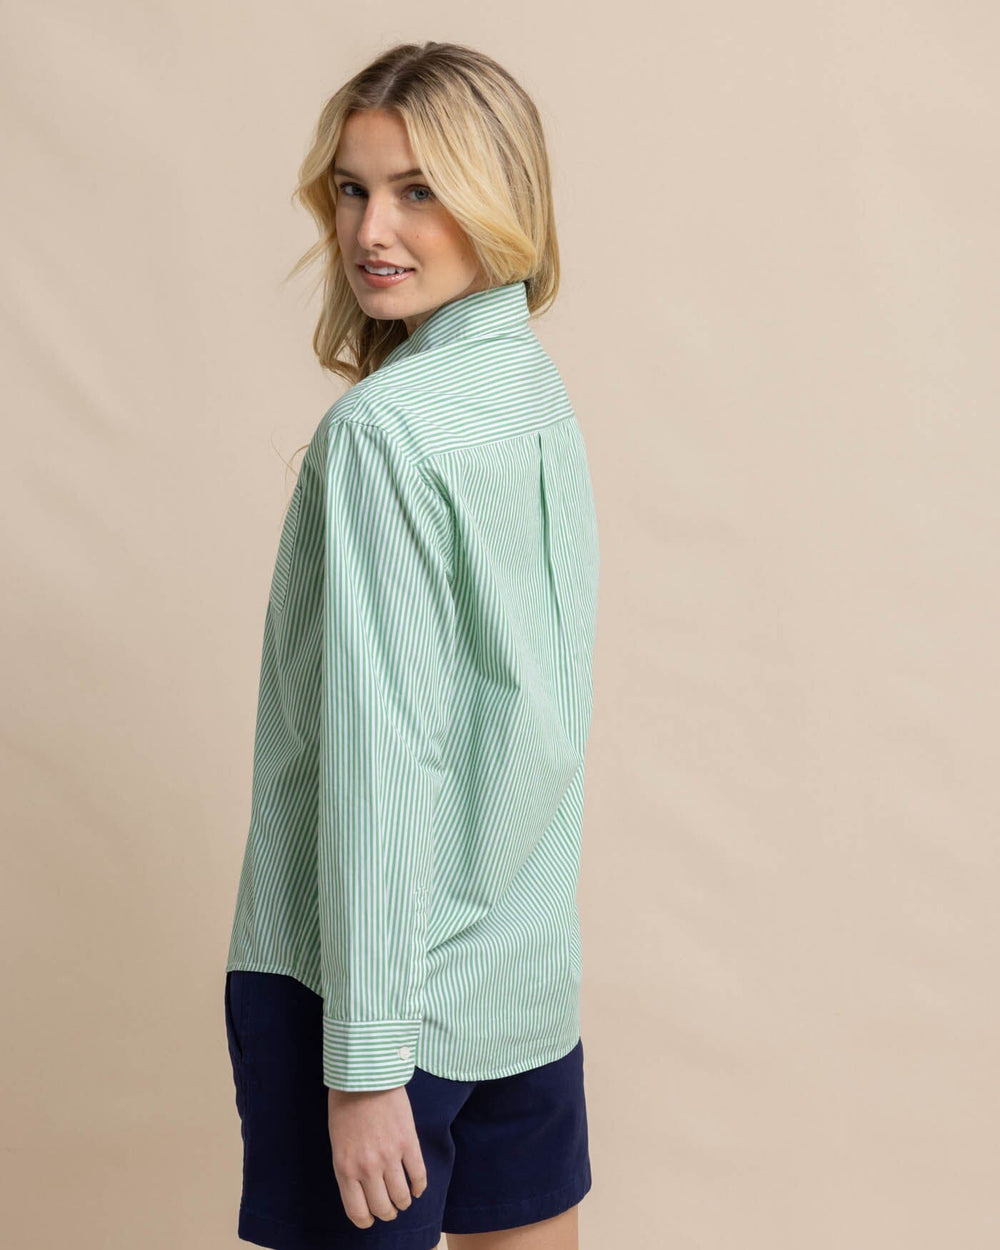 The back view of the Southern Tide Katherine Stripe Shirt by Southern Tide - Lawn Green